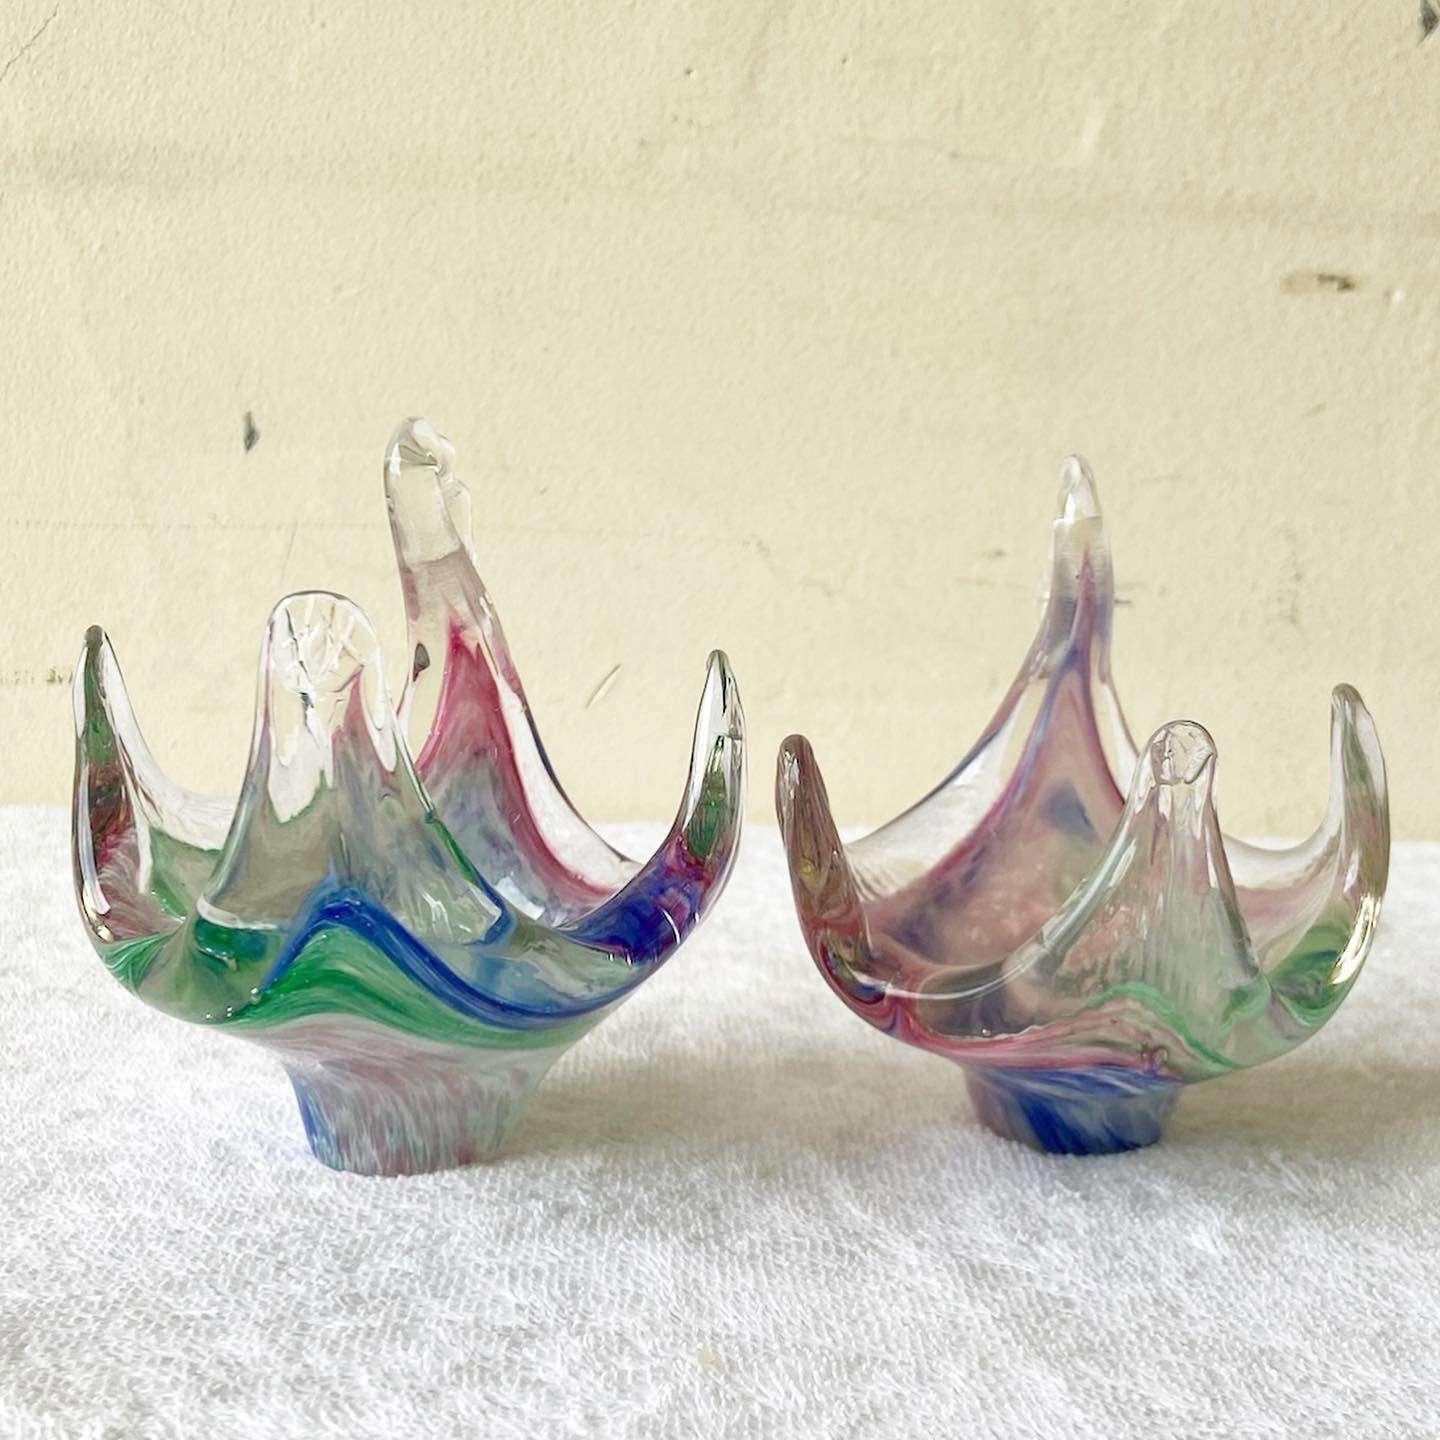 Postmodern Glass Swan Decorative Candy Dishes - a Pair In Good Condition For Sale In Delray Beach, FL